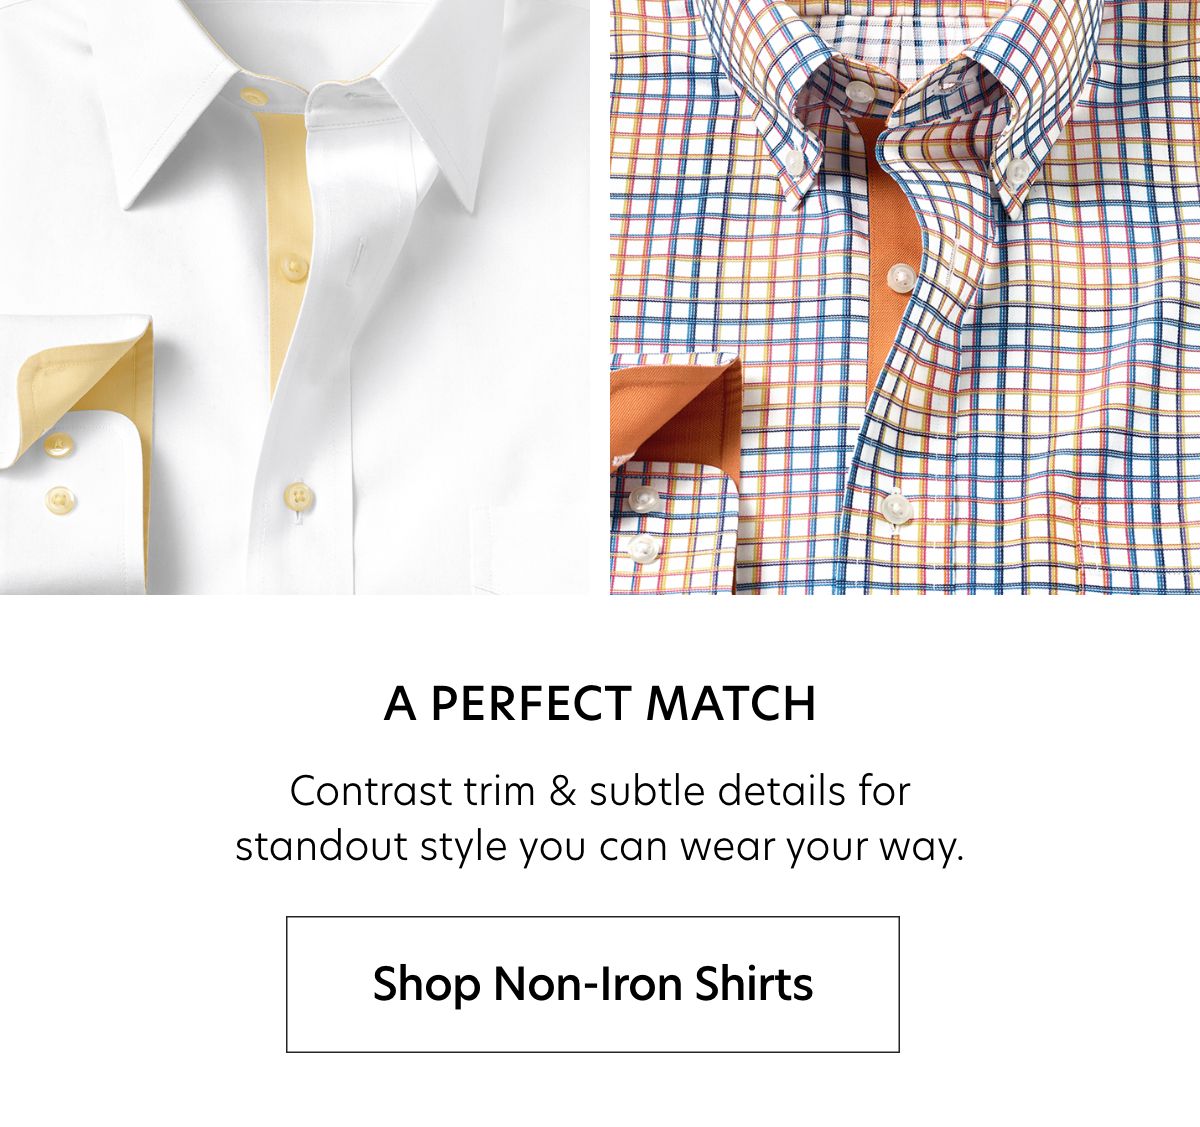  A PERFECT MATCH Contrast trim subtle details for standout style you can wear your way. Shop Non-Iron Shirts 